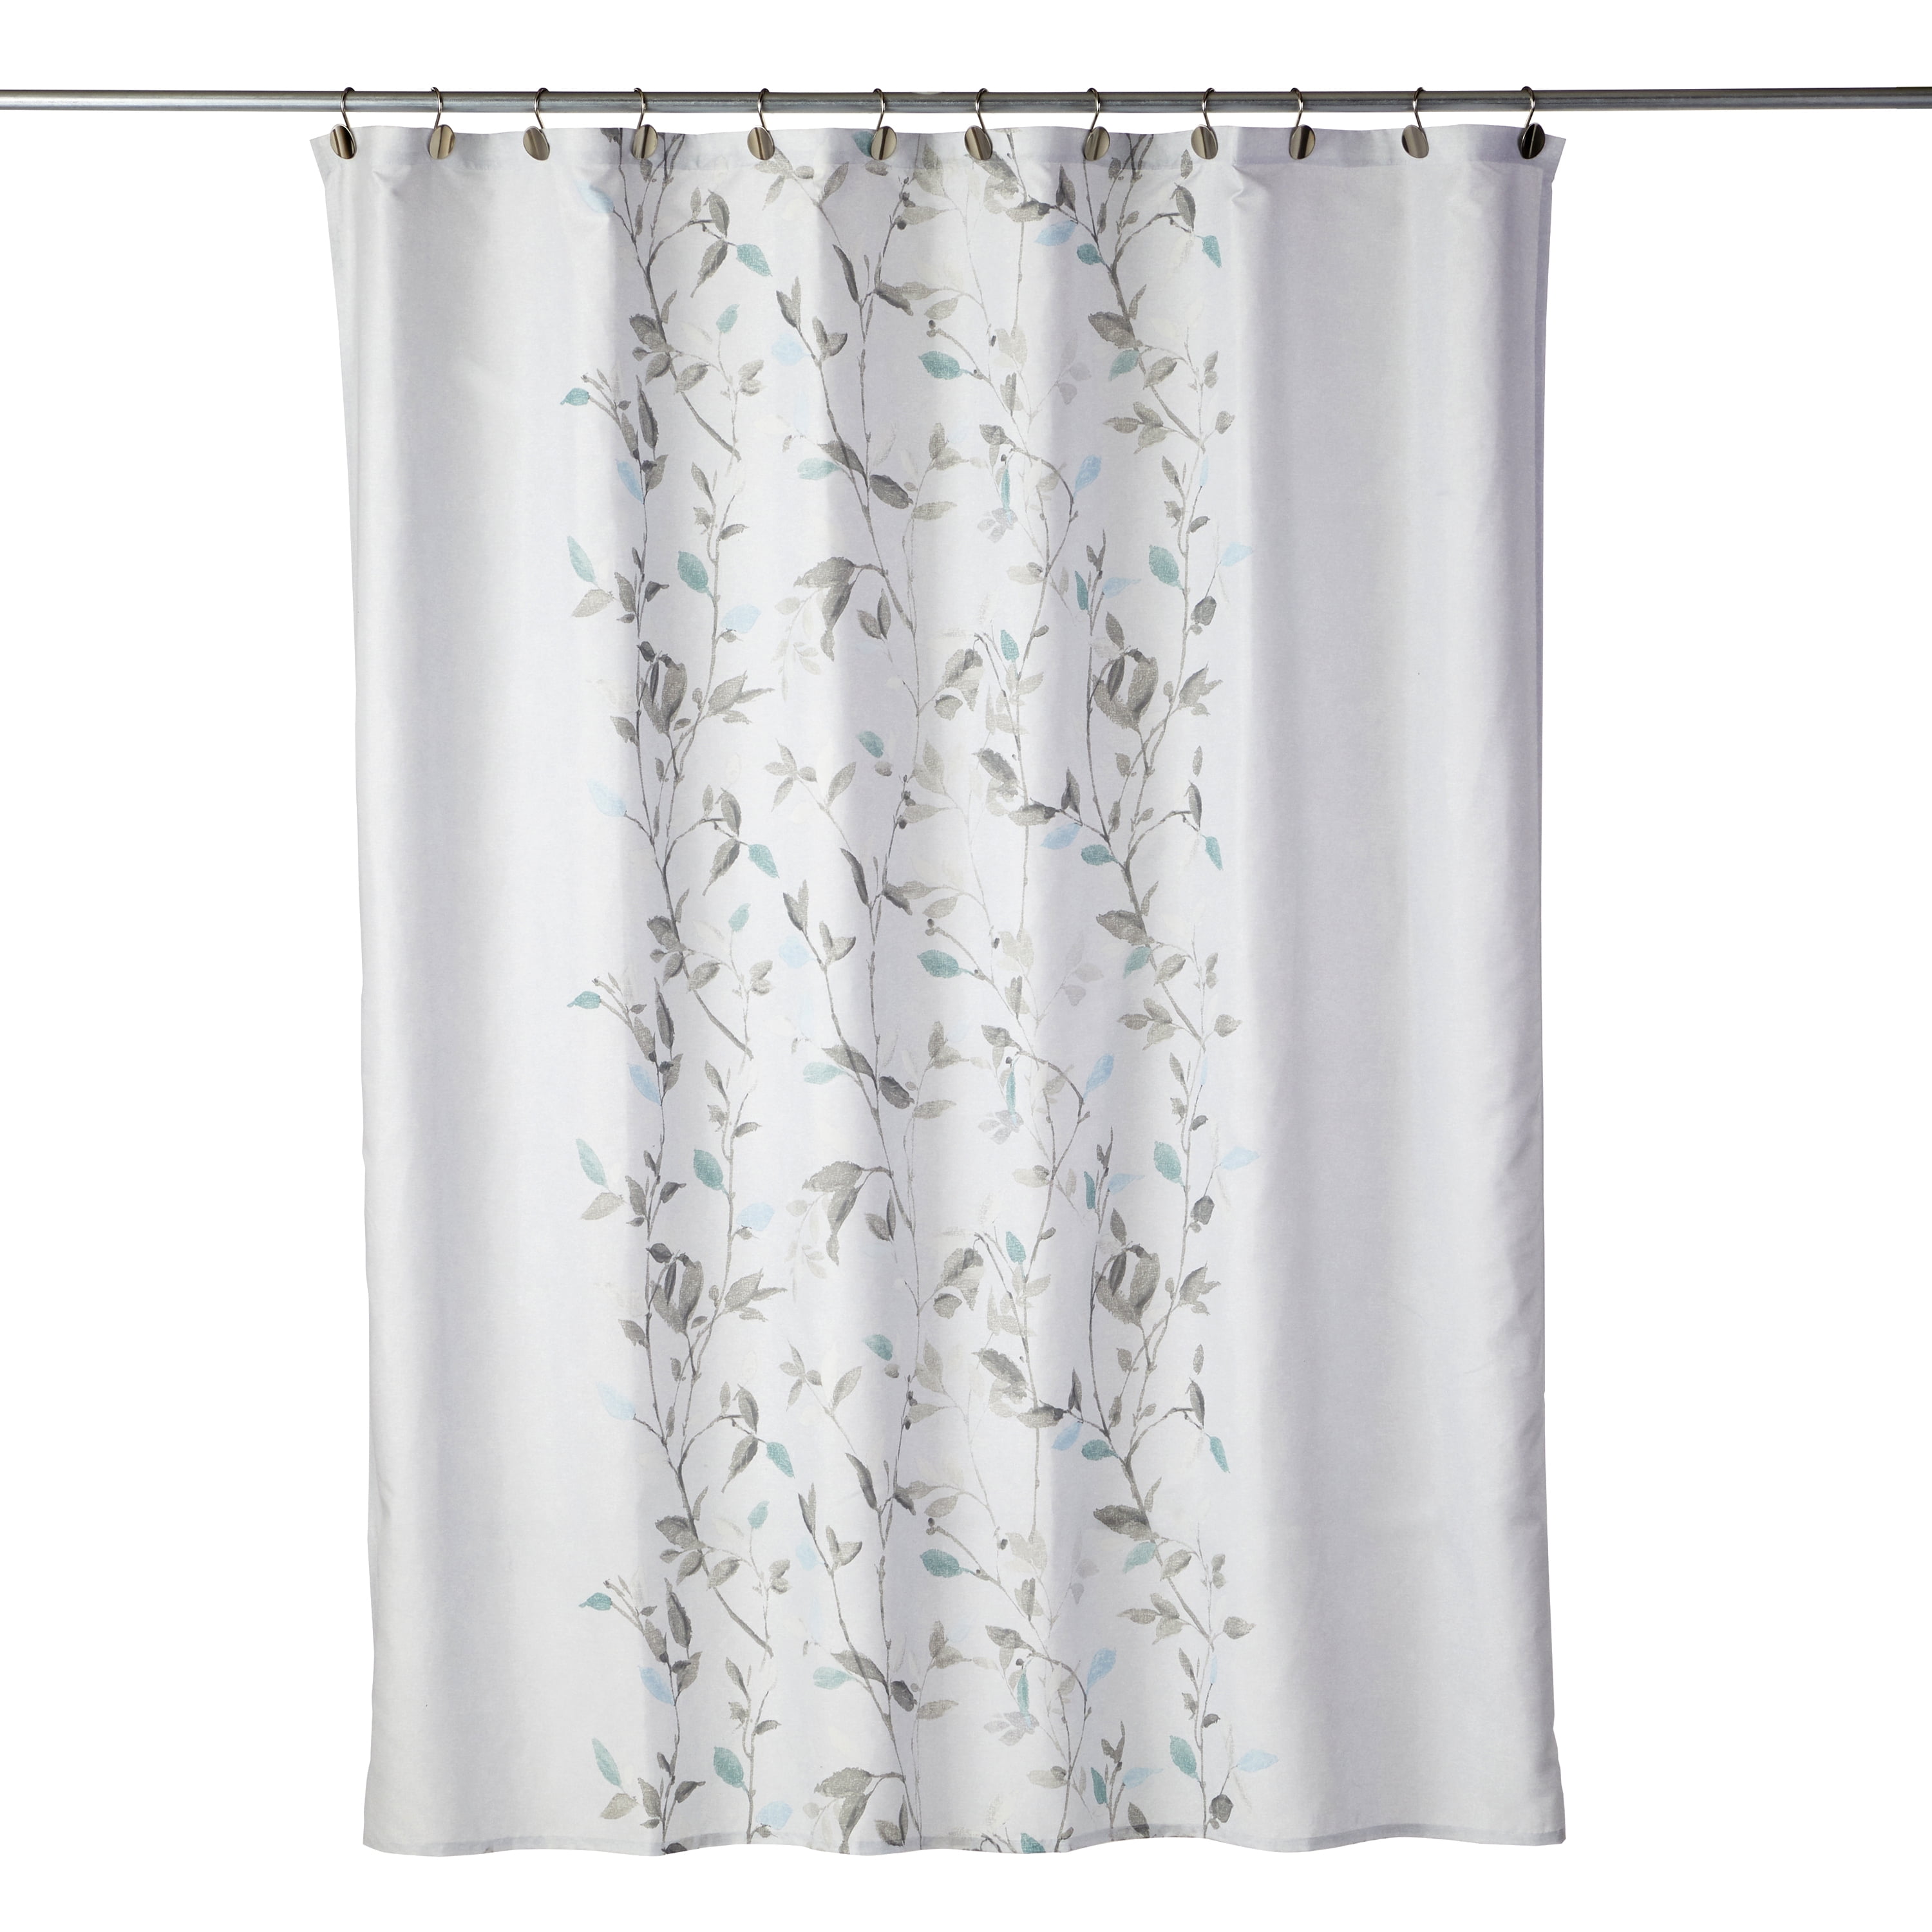 Arbor Leaves Fabric Shower Curtain, Finding Nemo Shower Curtain Target